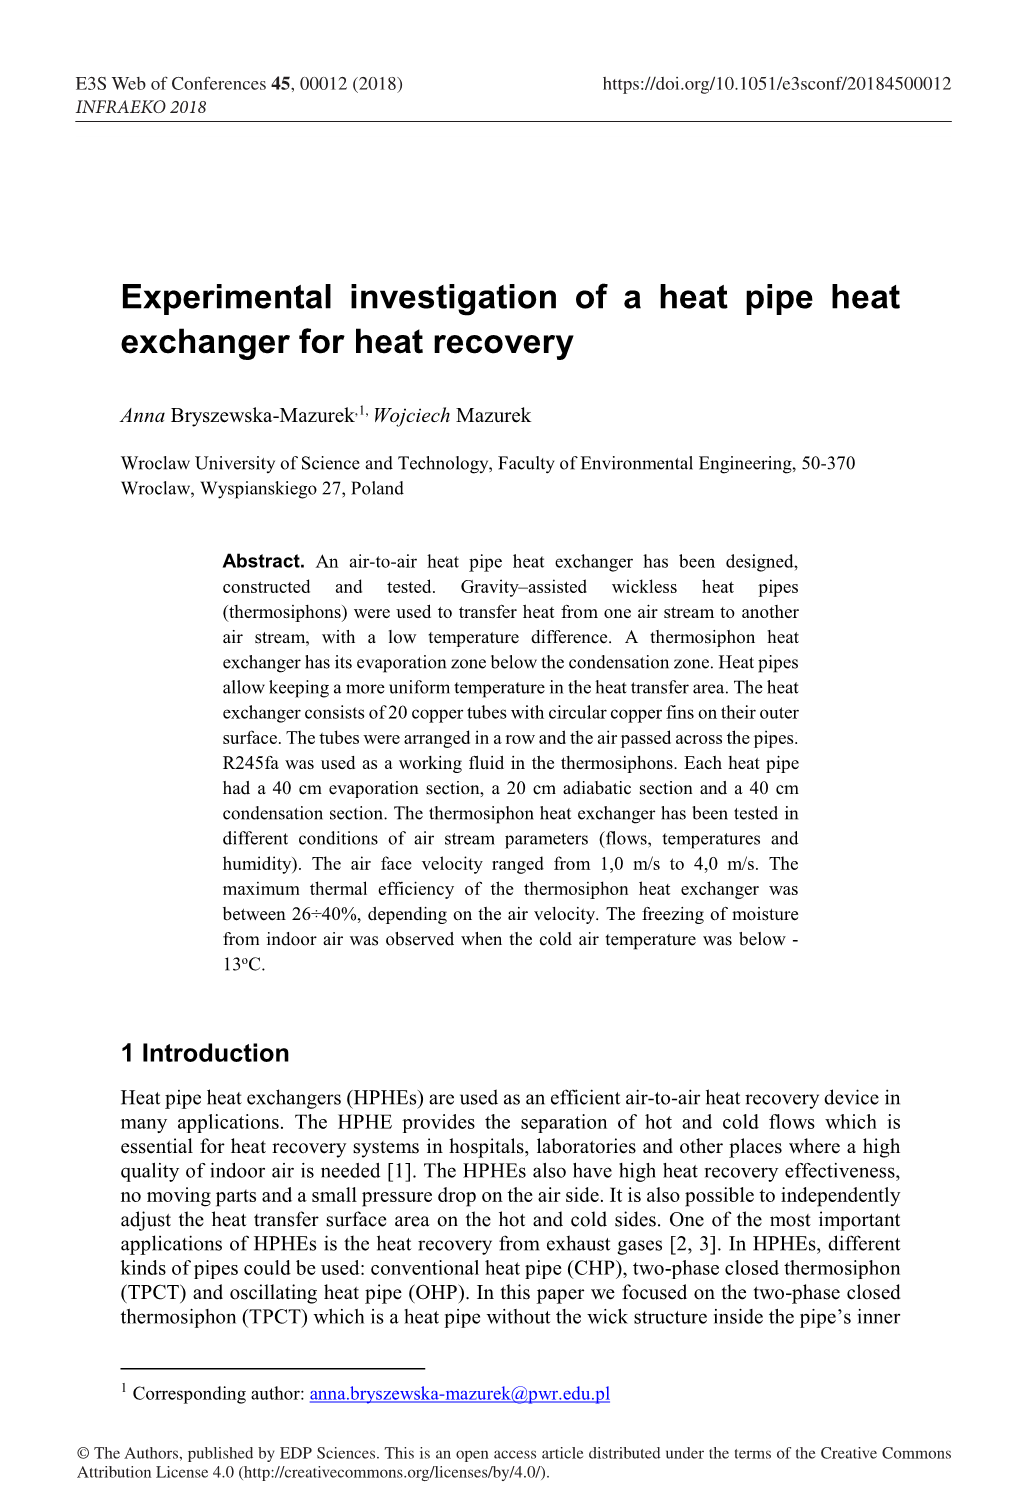 Experimental Investigation of a Heat Pipe Heat Exchanger for Heat Recovery